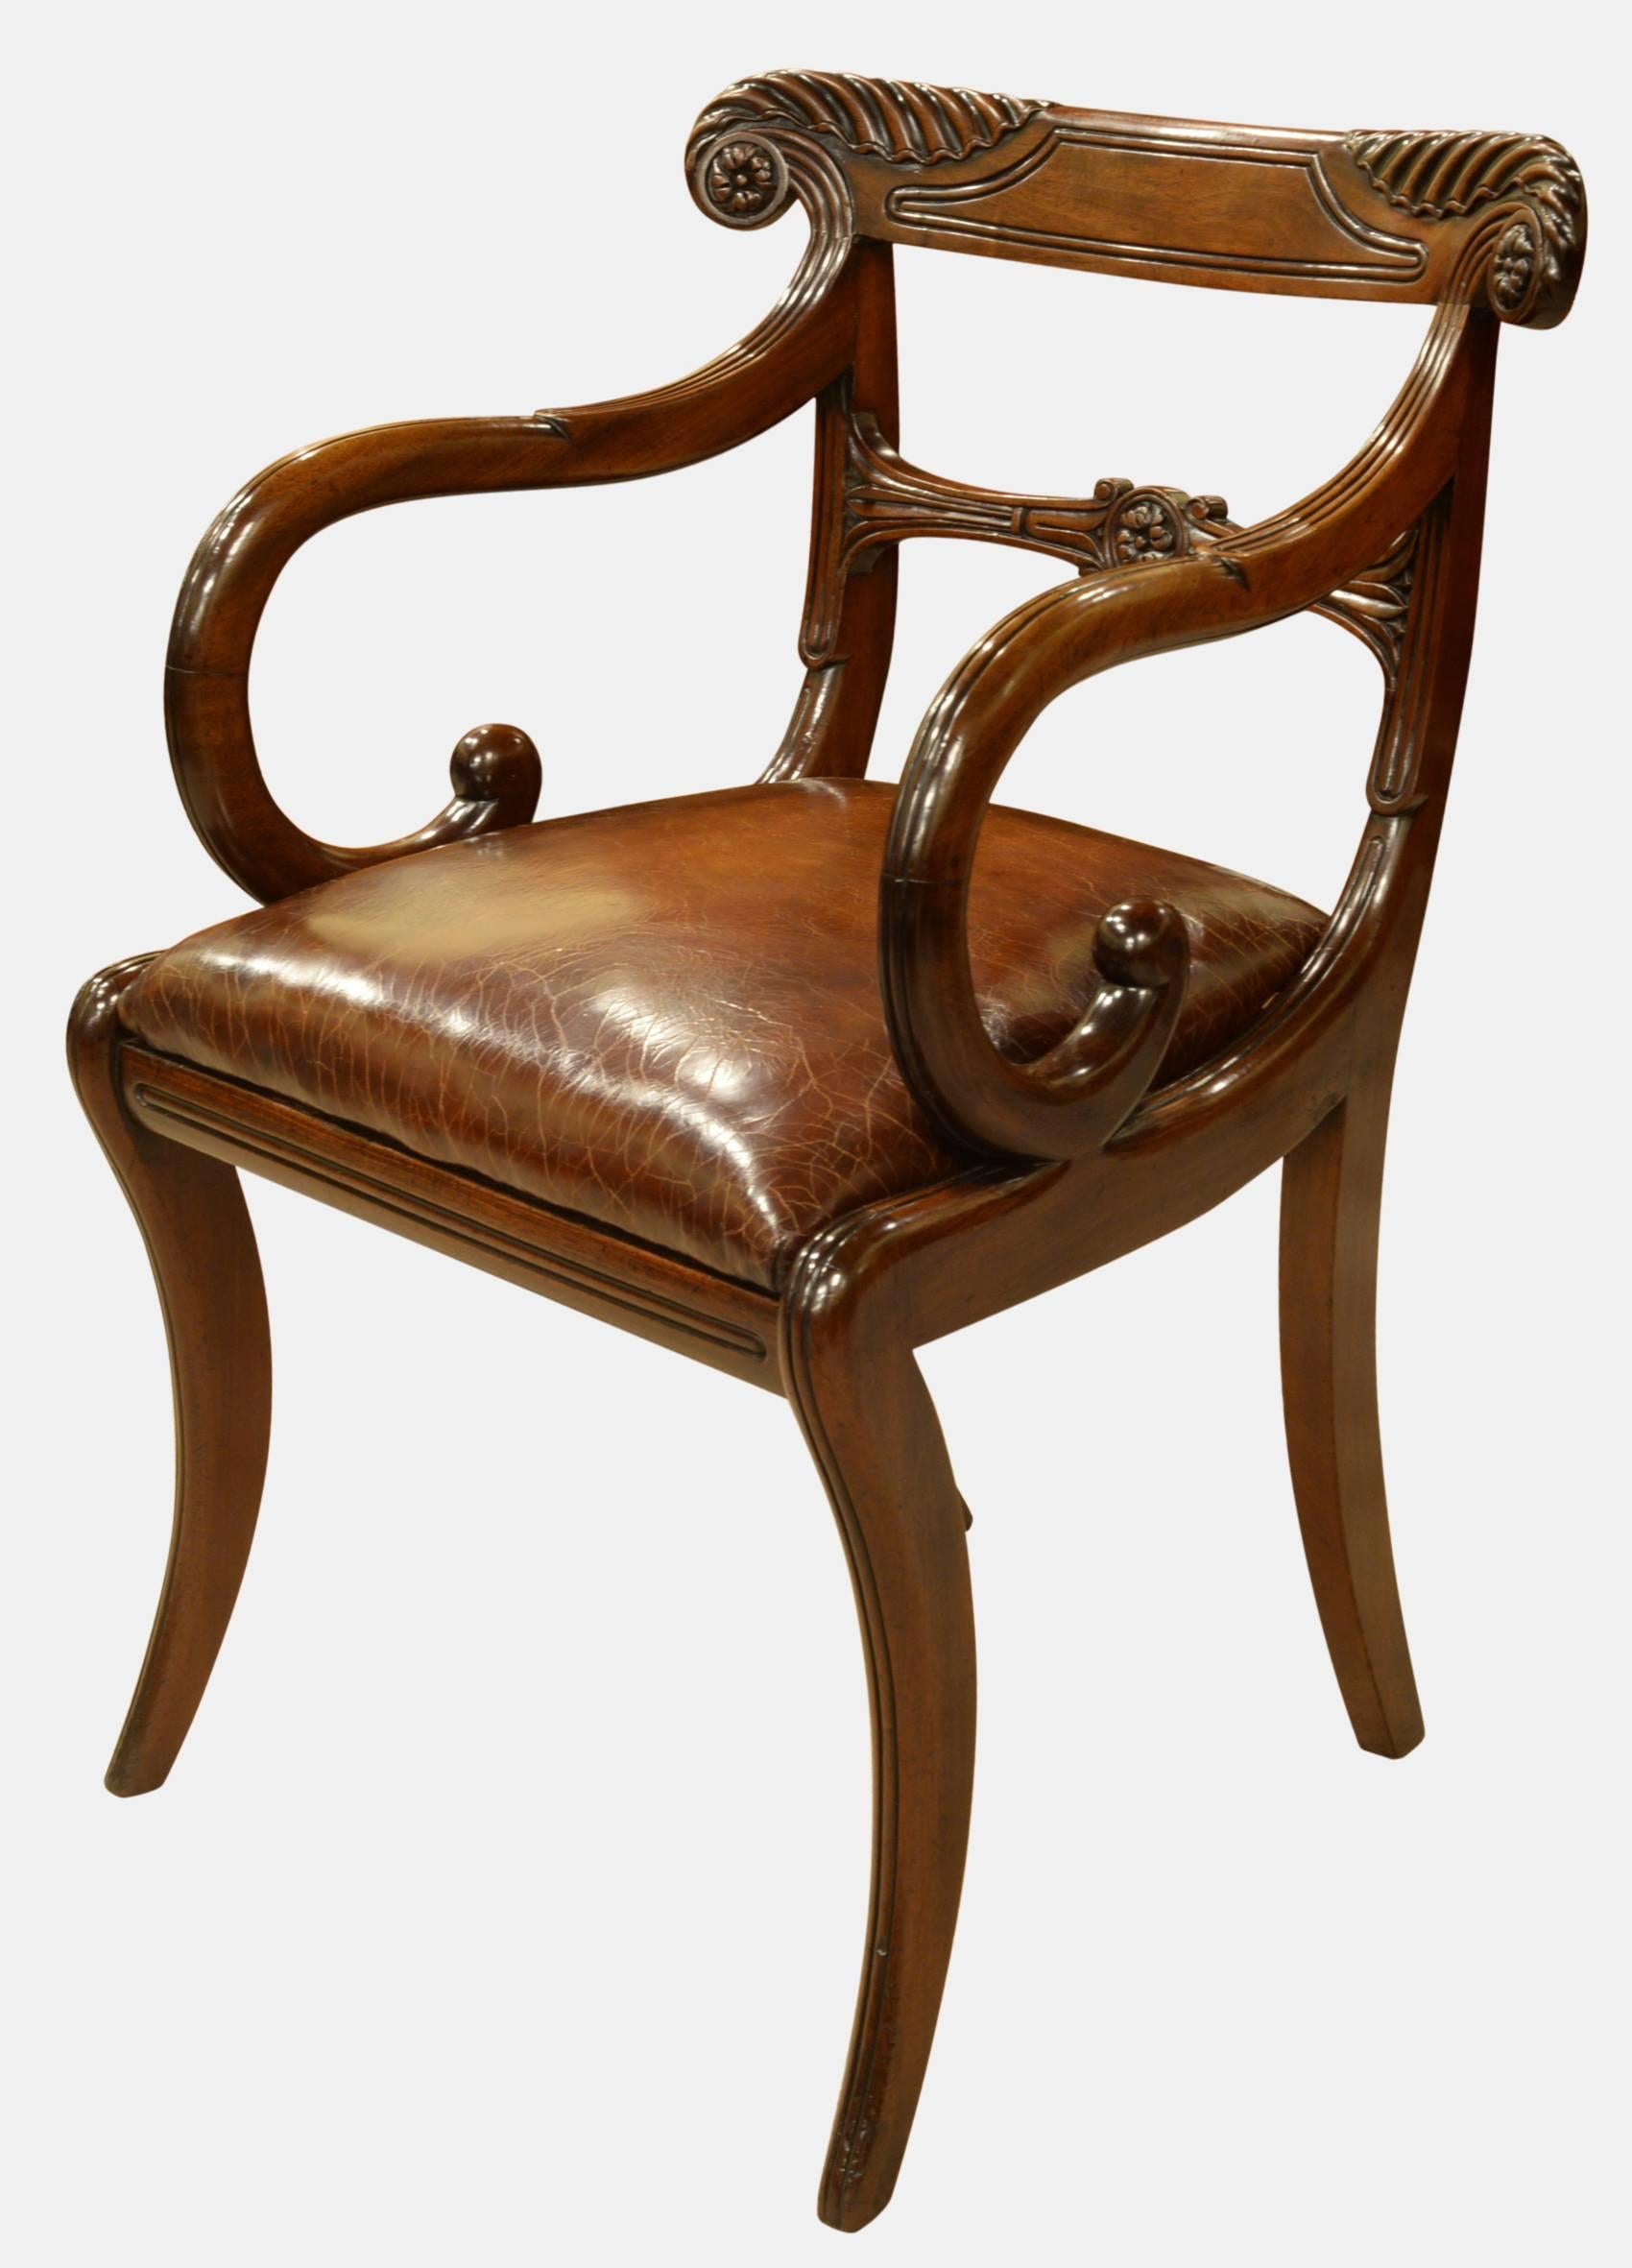 A fine pair of Regency period carved mahogany carver chairs of trafalagan back design with leather seats.

circa 1810.